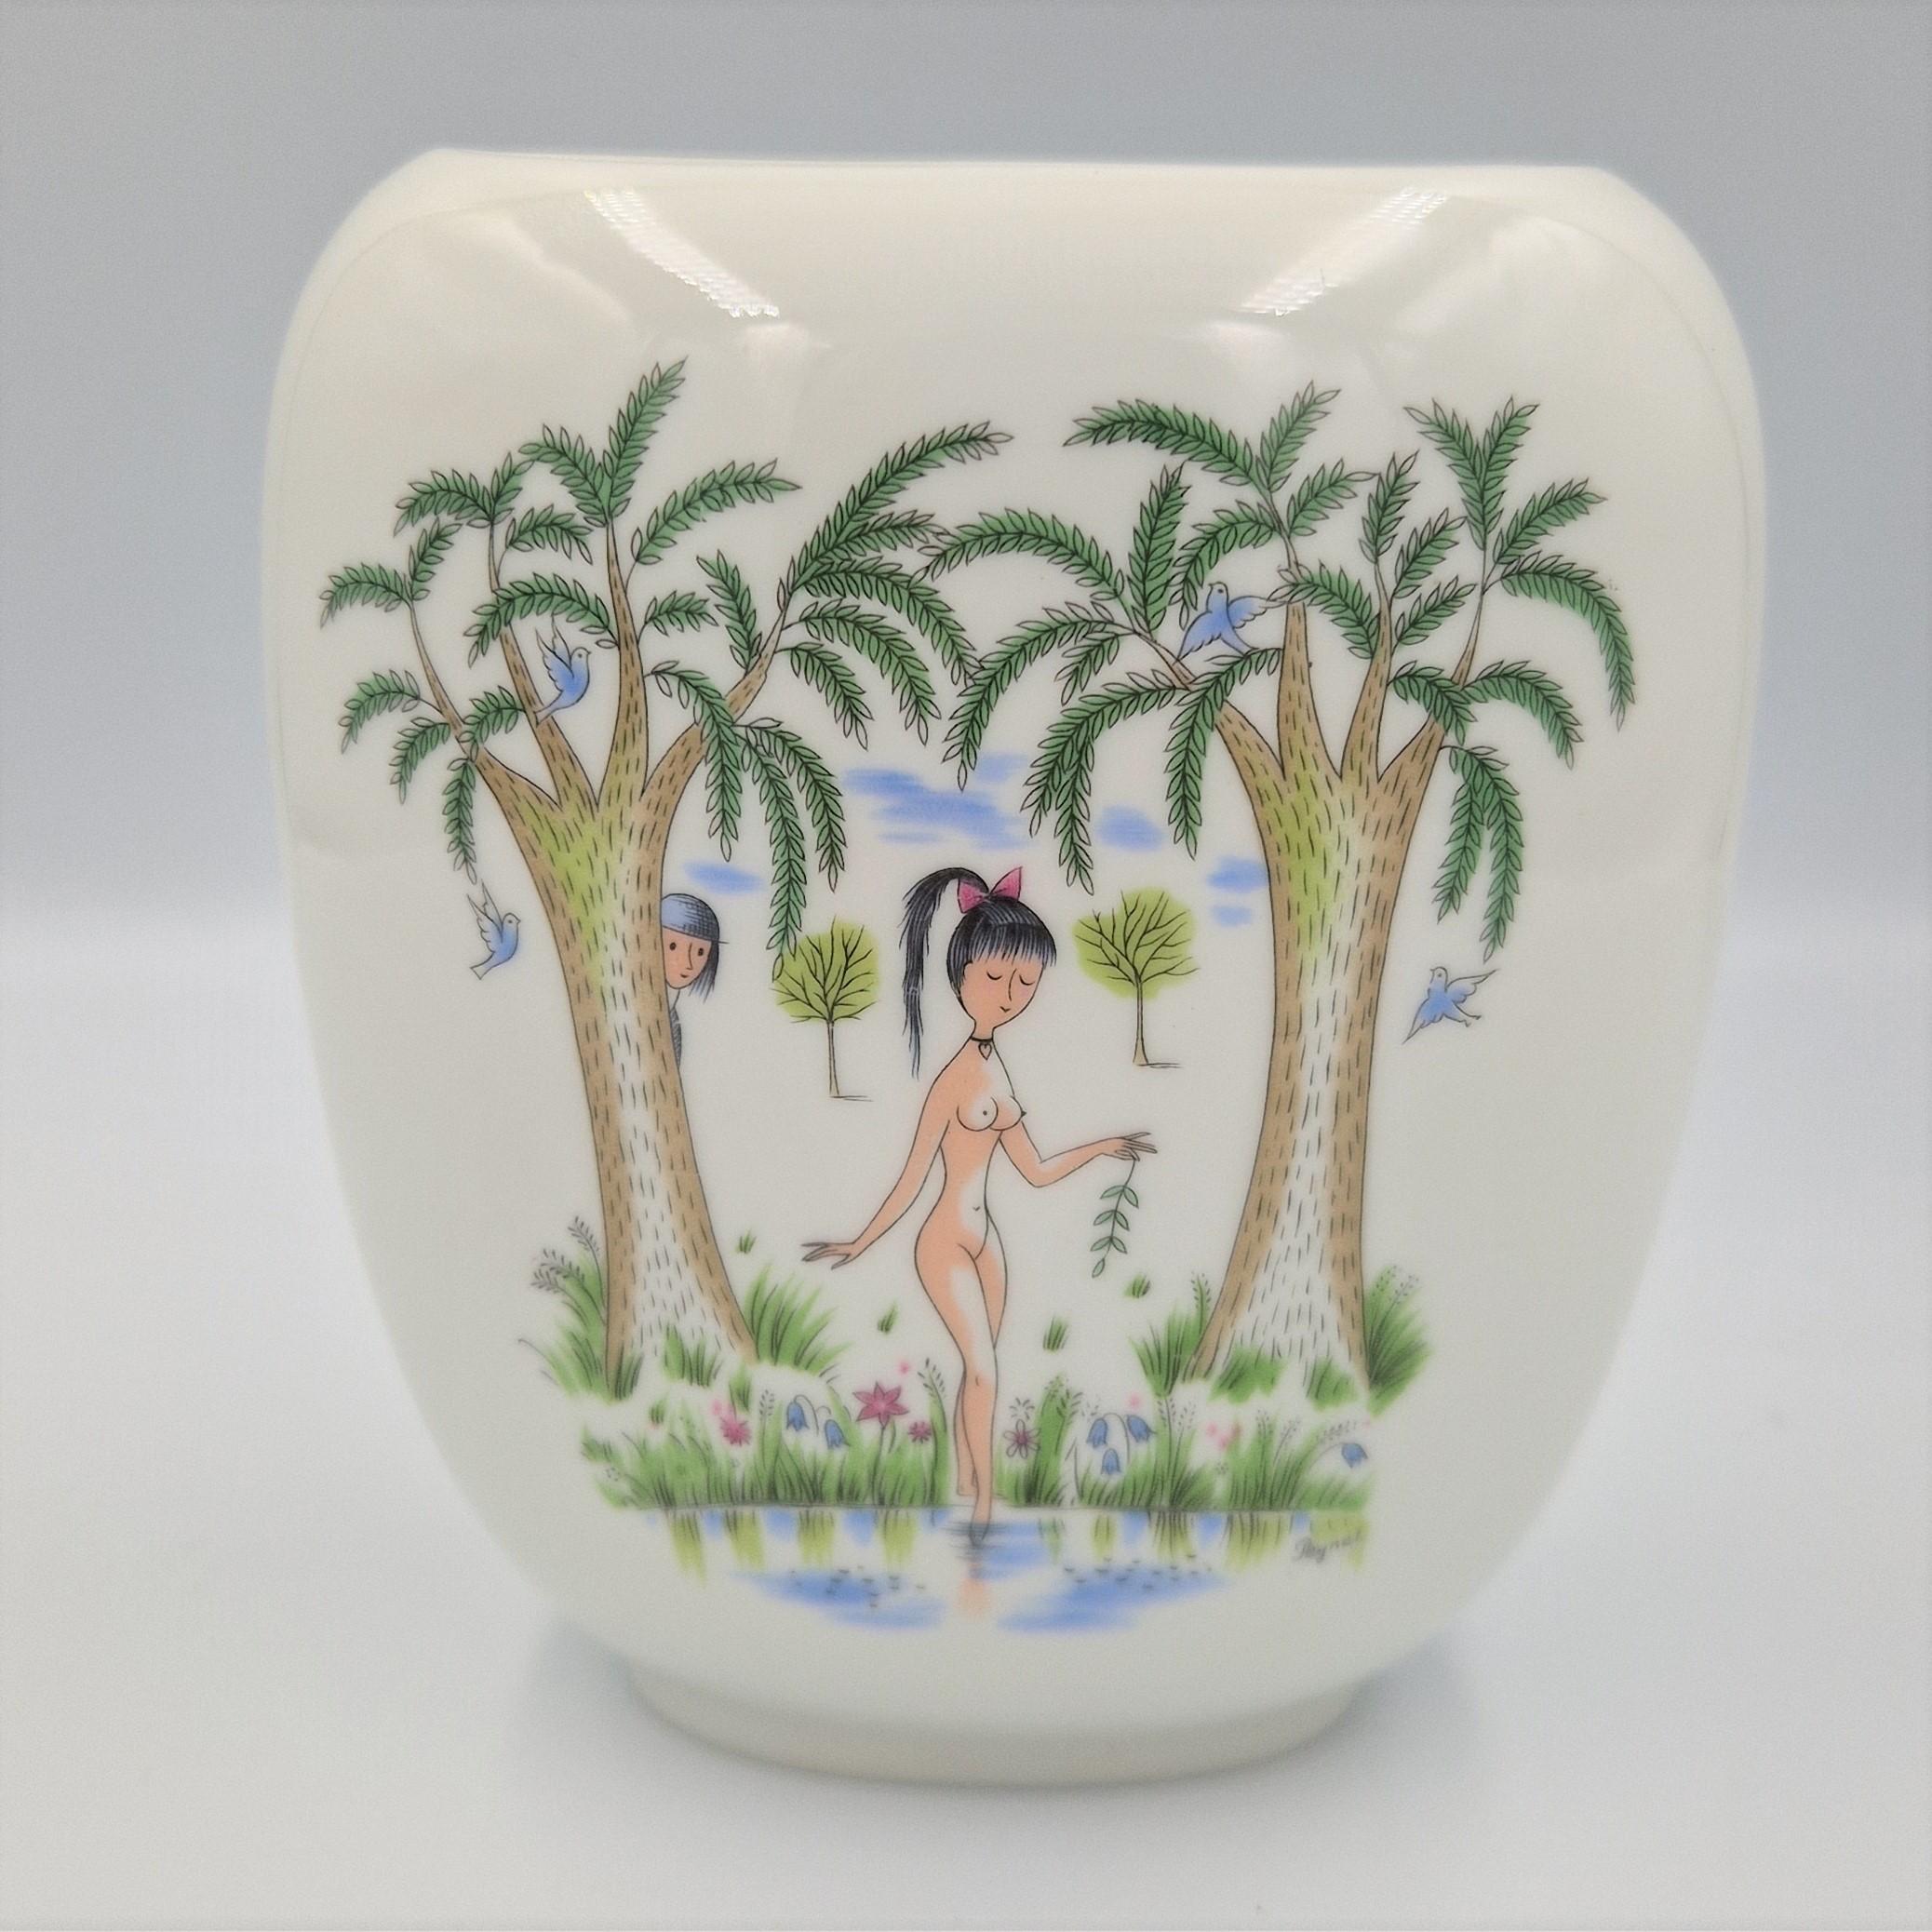 This item are made of porelain, hand painted and signed from Raymond Peynet.